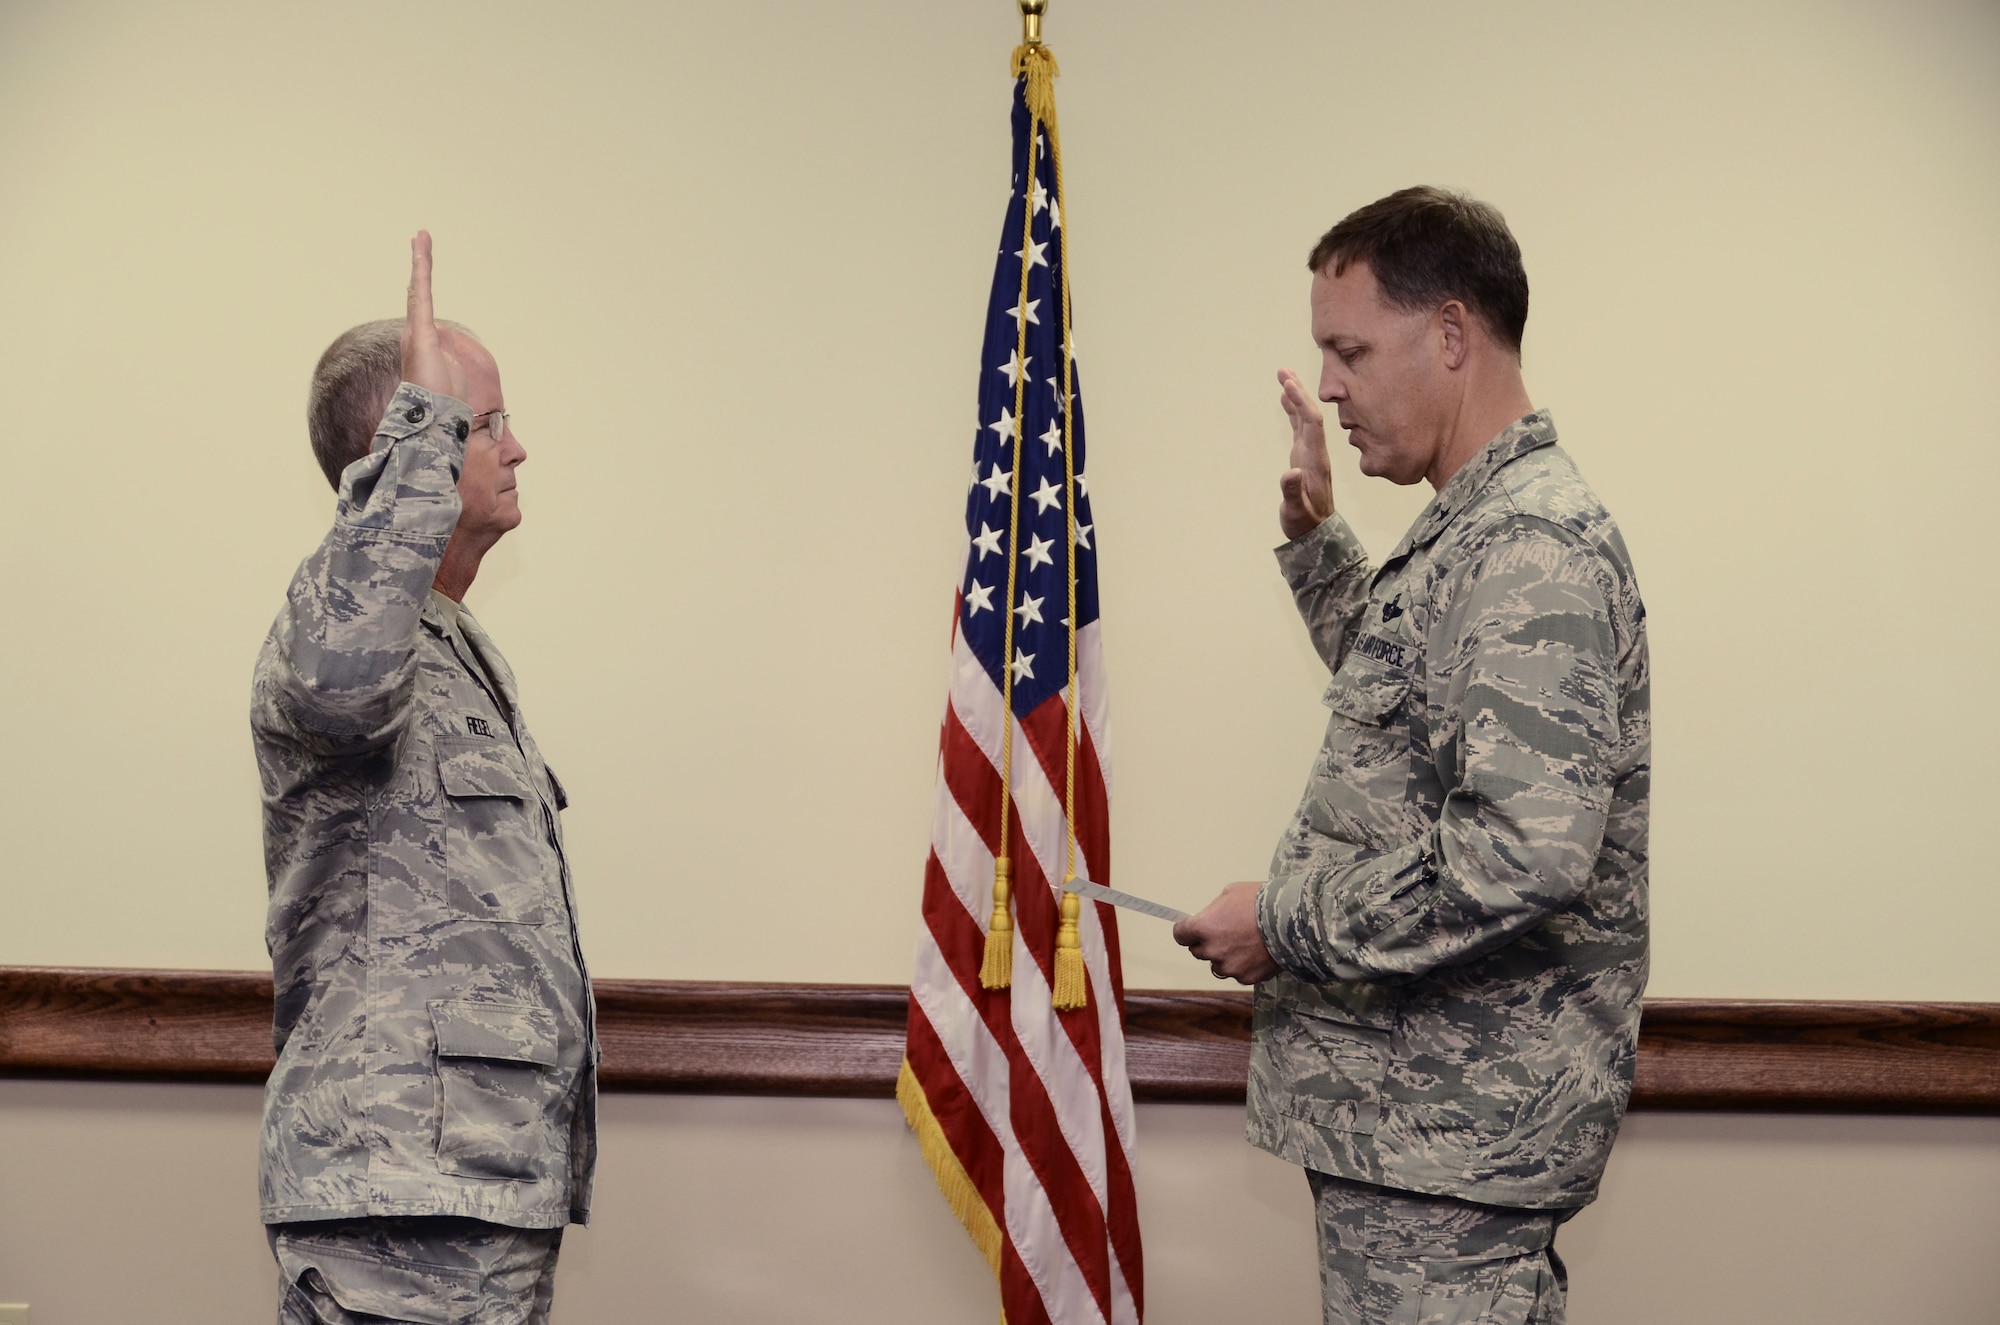 Lt. Col. Driller Fiegel is sworn in as the new 36th Wing Inspector General by Brig. Gen. Steven Garland, 36th Wing Commander, Feb. 11, 2014, on Andersen Air Force Base, Guam. The IG implements the complaint resolution and fraud, waste and abuse programs to find any issues affecting the organization and holds exercise and inspection programs to ensure everything is ready for the wing to meet operational requirements. (U.S. Air Force photo by Airman 1st Class Amanda Morris/Released)